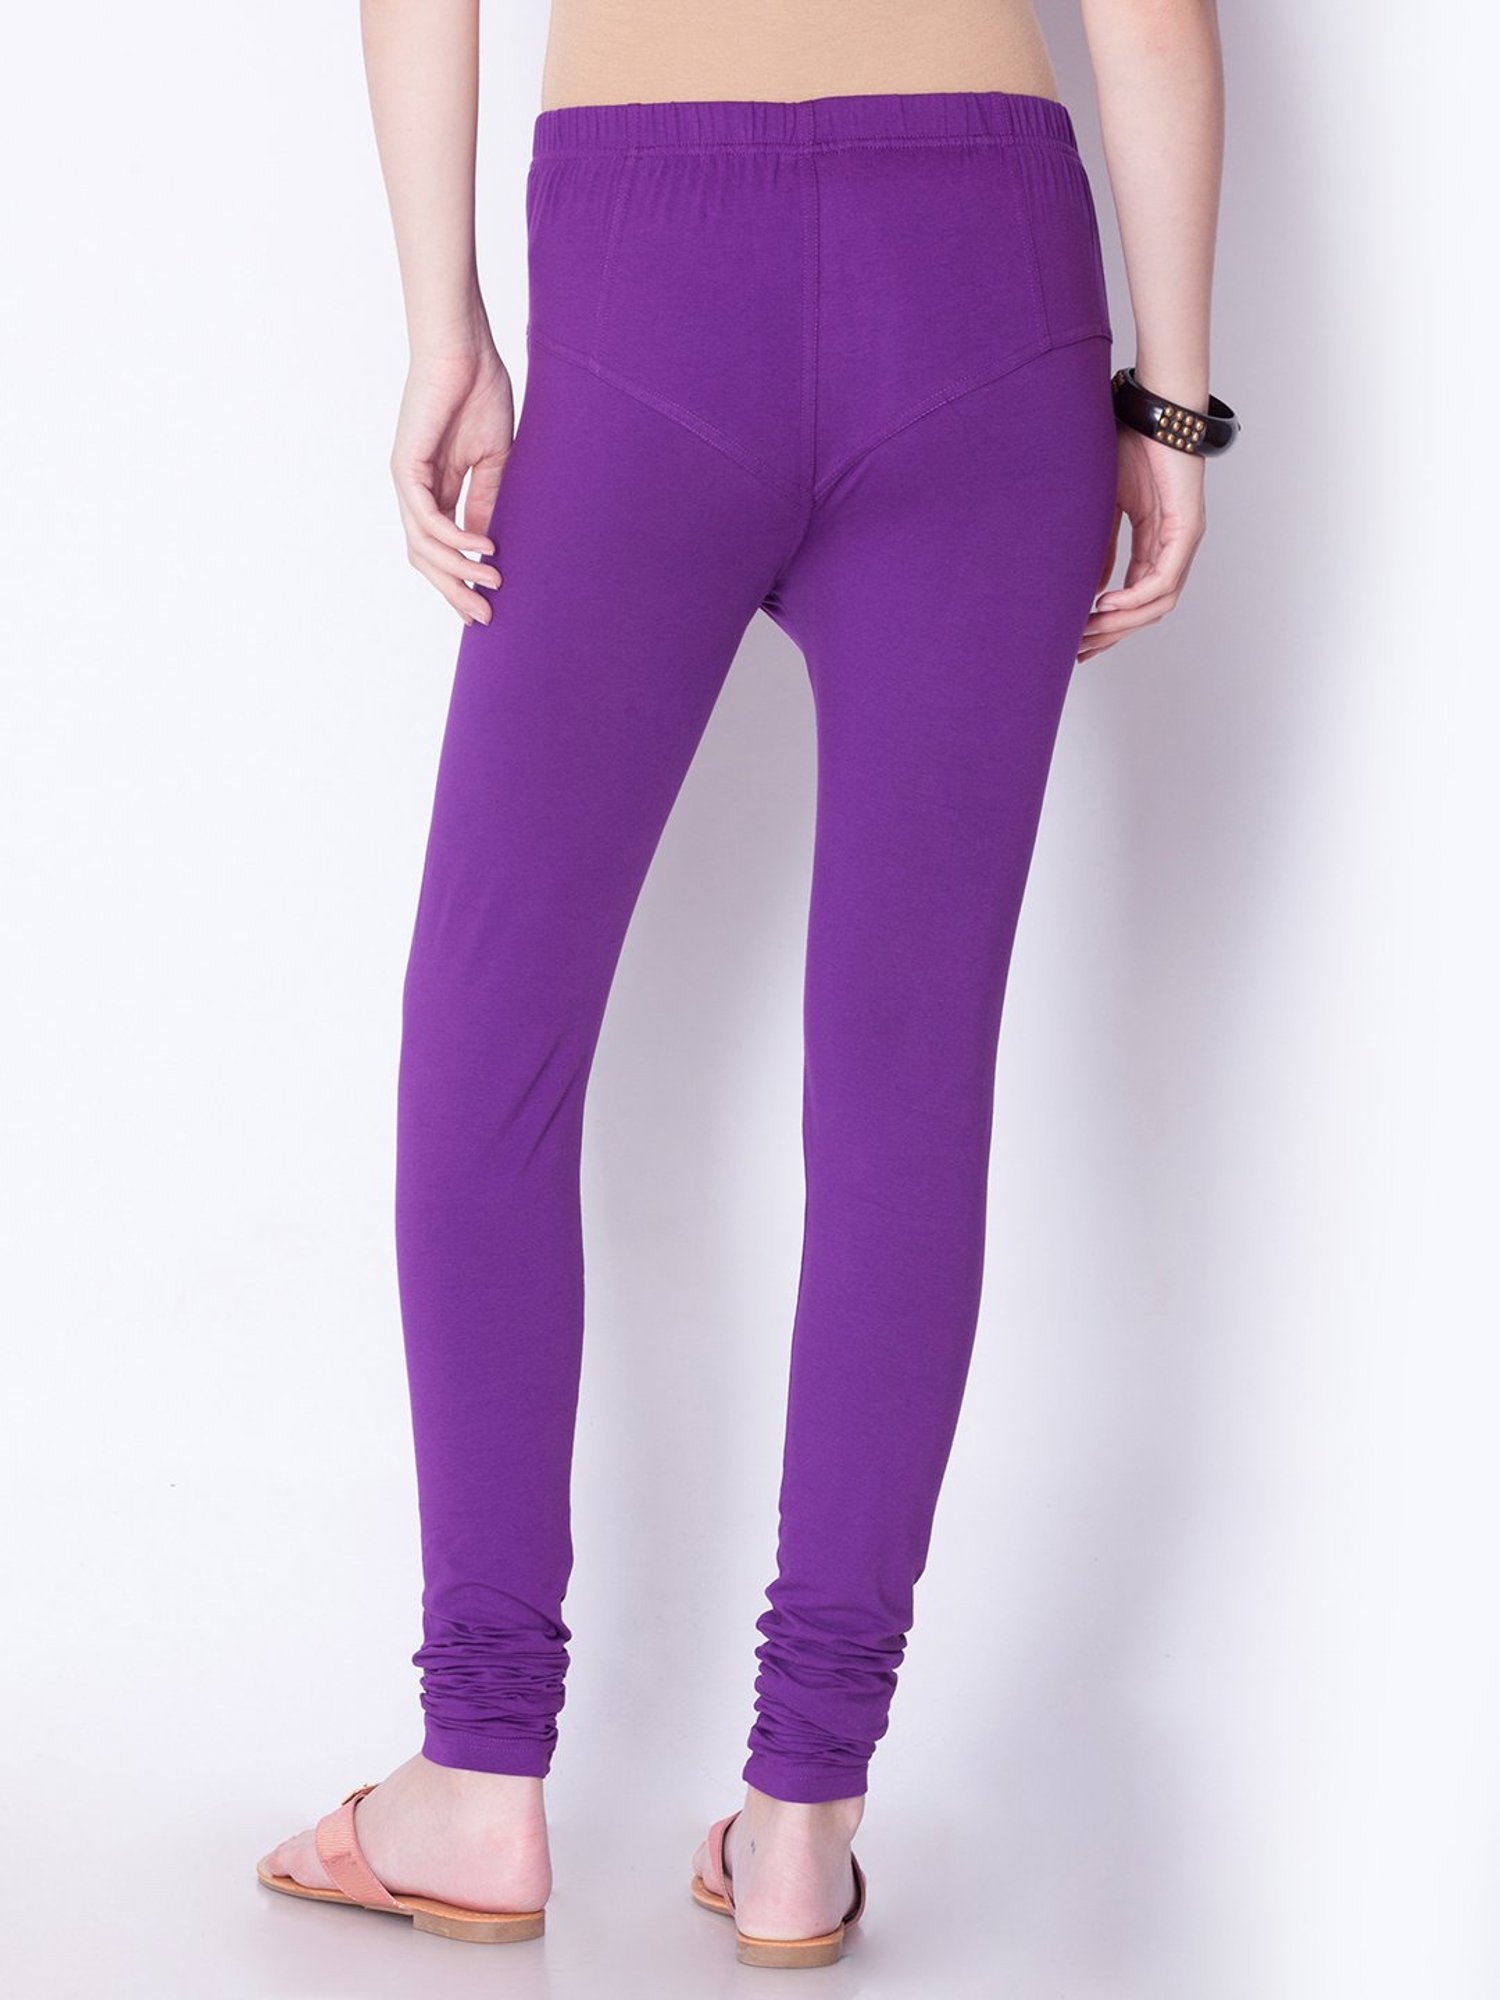 Purple Color Stretchable And Comfortable Lycra Fabric Leggings For Ladies  Bust Size: 32 Centimeter (Cm) at Best Price in Sonbhadra | Friends Dresses